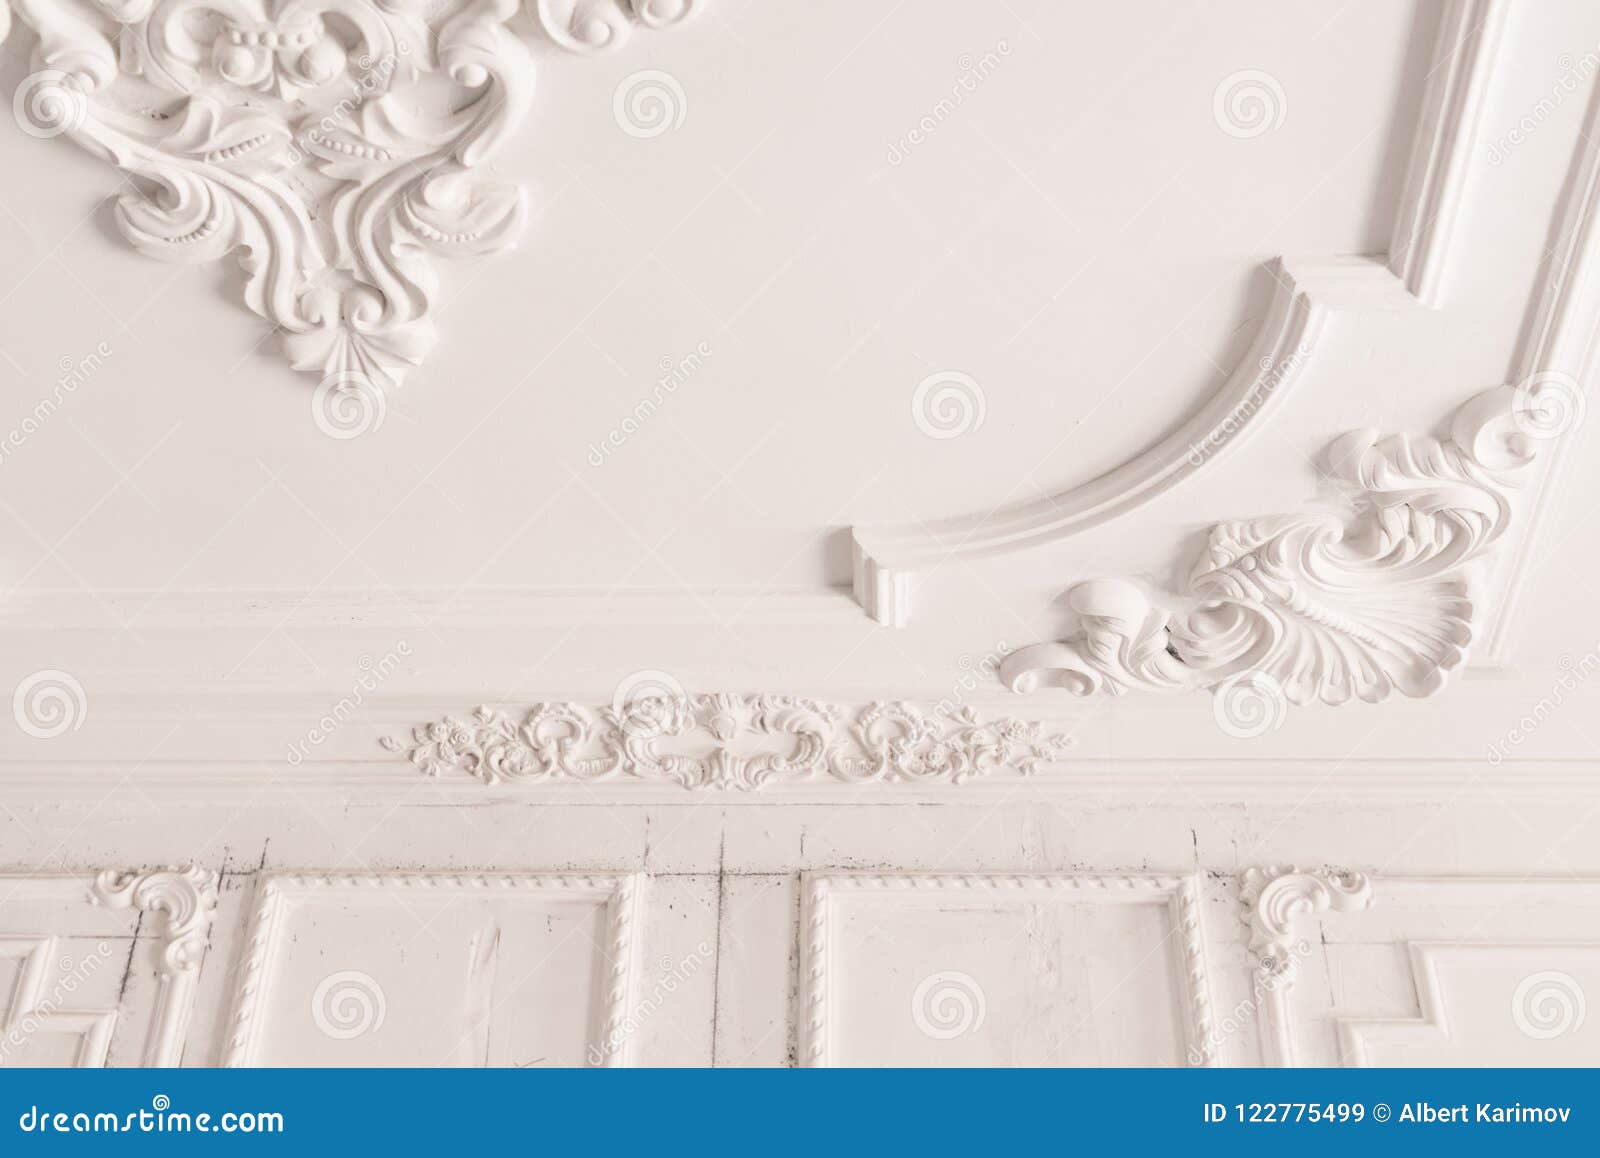 Plaster Molding In The Room Stock Image Image Of Classic